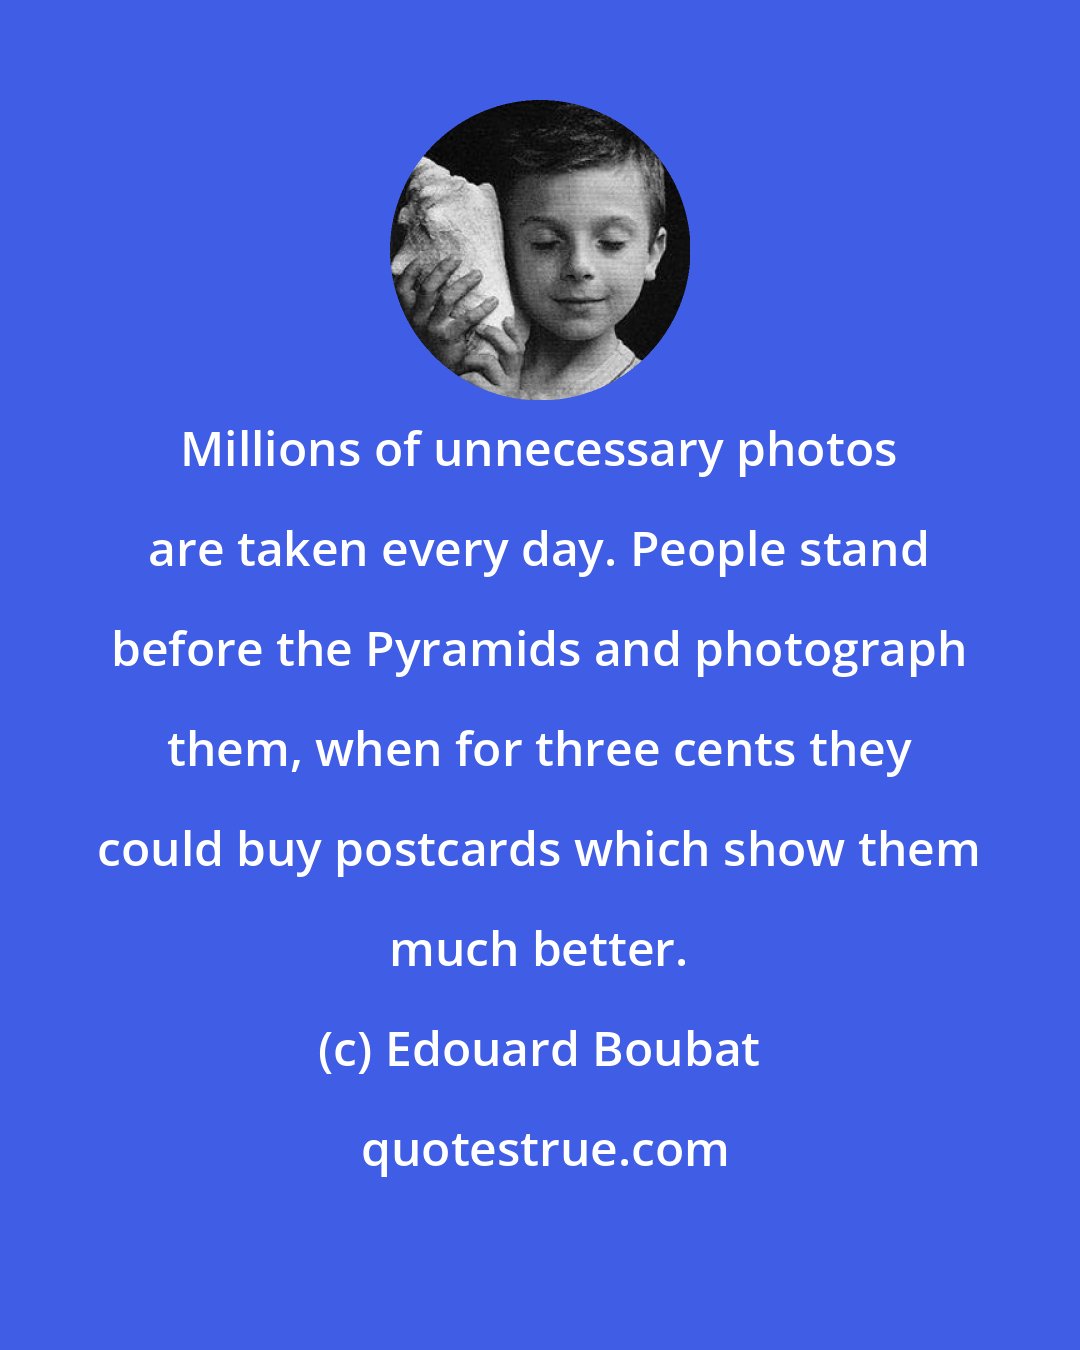 Edouard Boubat: Millions of unnecessary photos are taken every day. People stand before the Pyramids and photograph them, when for three cents they could buy postcards which show them much better.